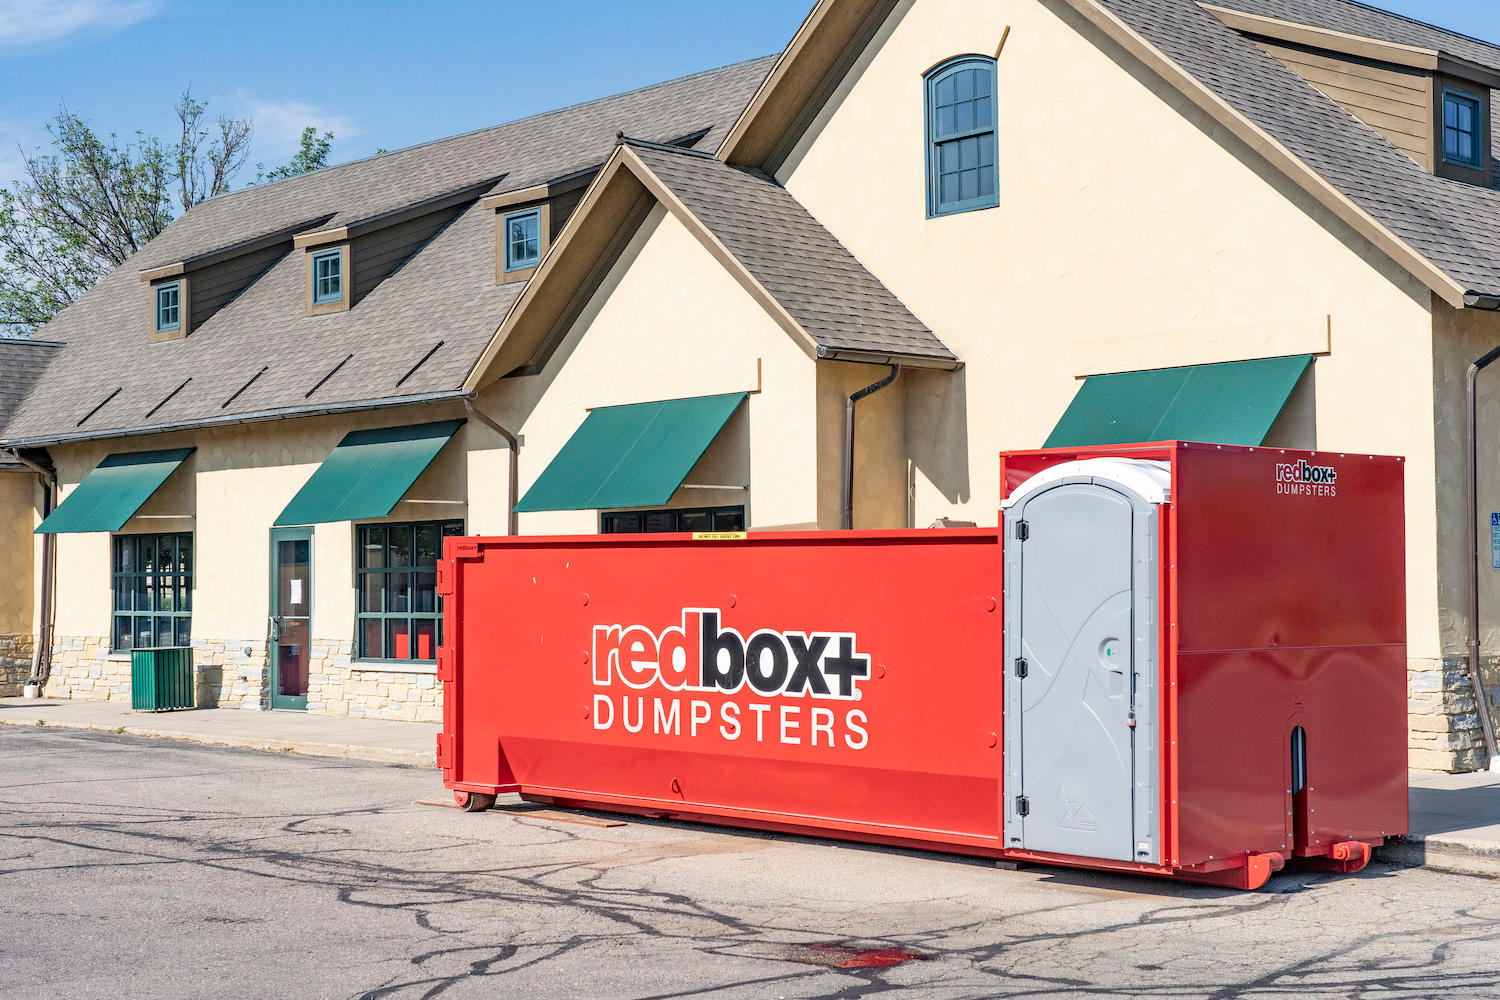 redbox+ Dumpsters 2-in-1 dumpster and portable toilet solution